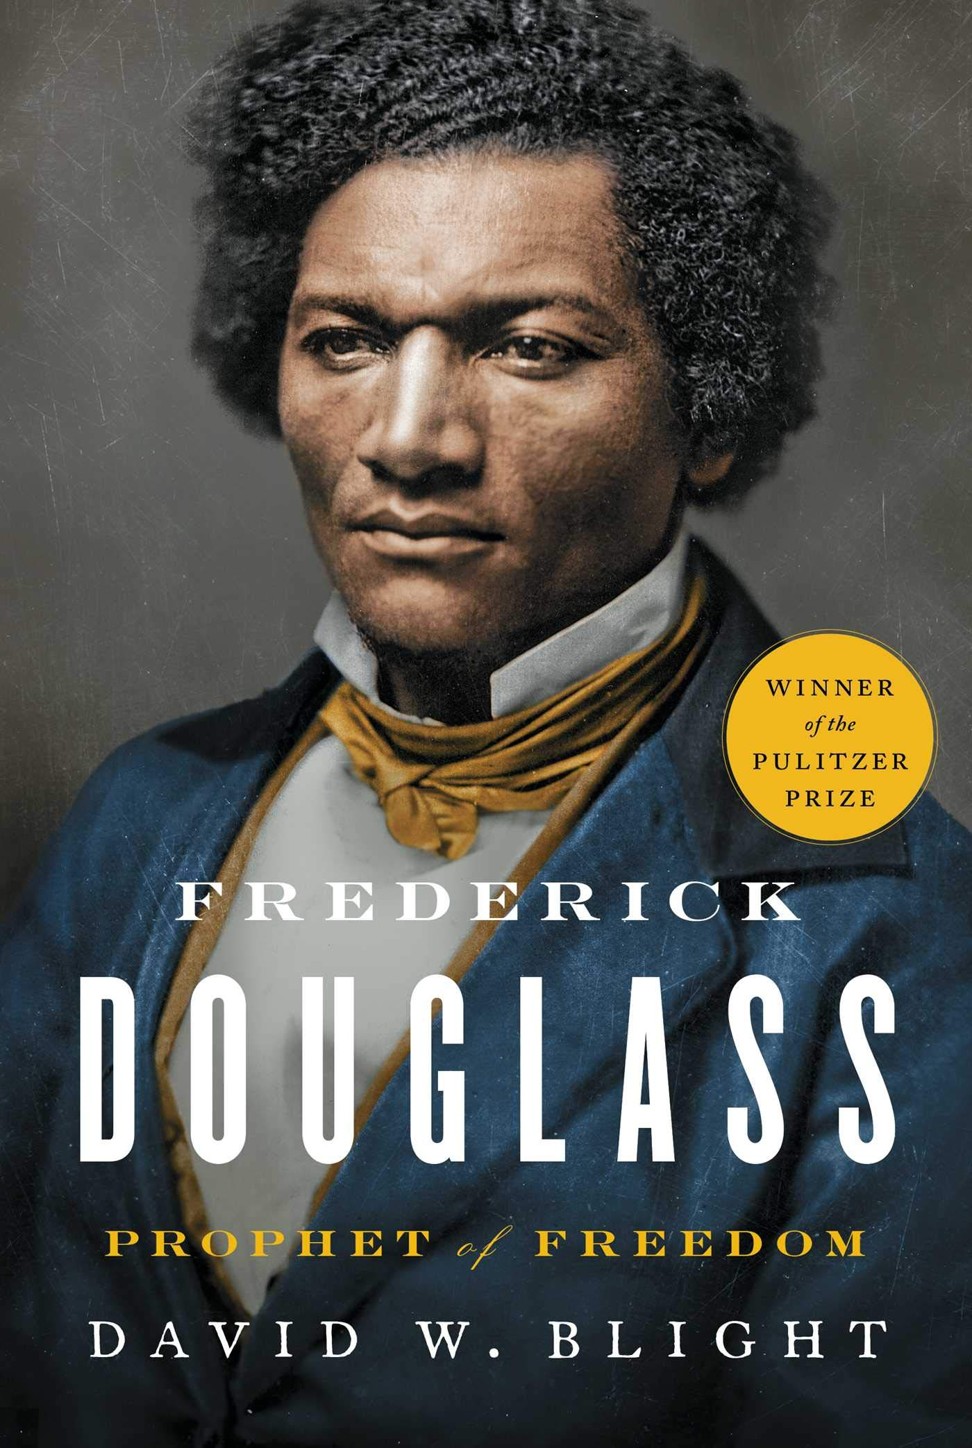 Frederick Douglass: Prophet of Freedom has been adapted into a feature film.